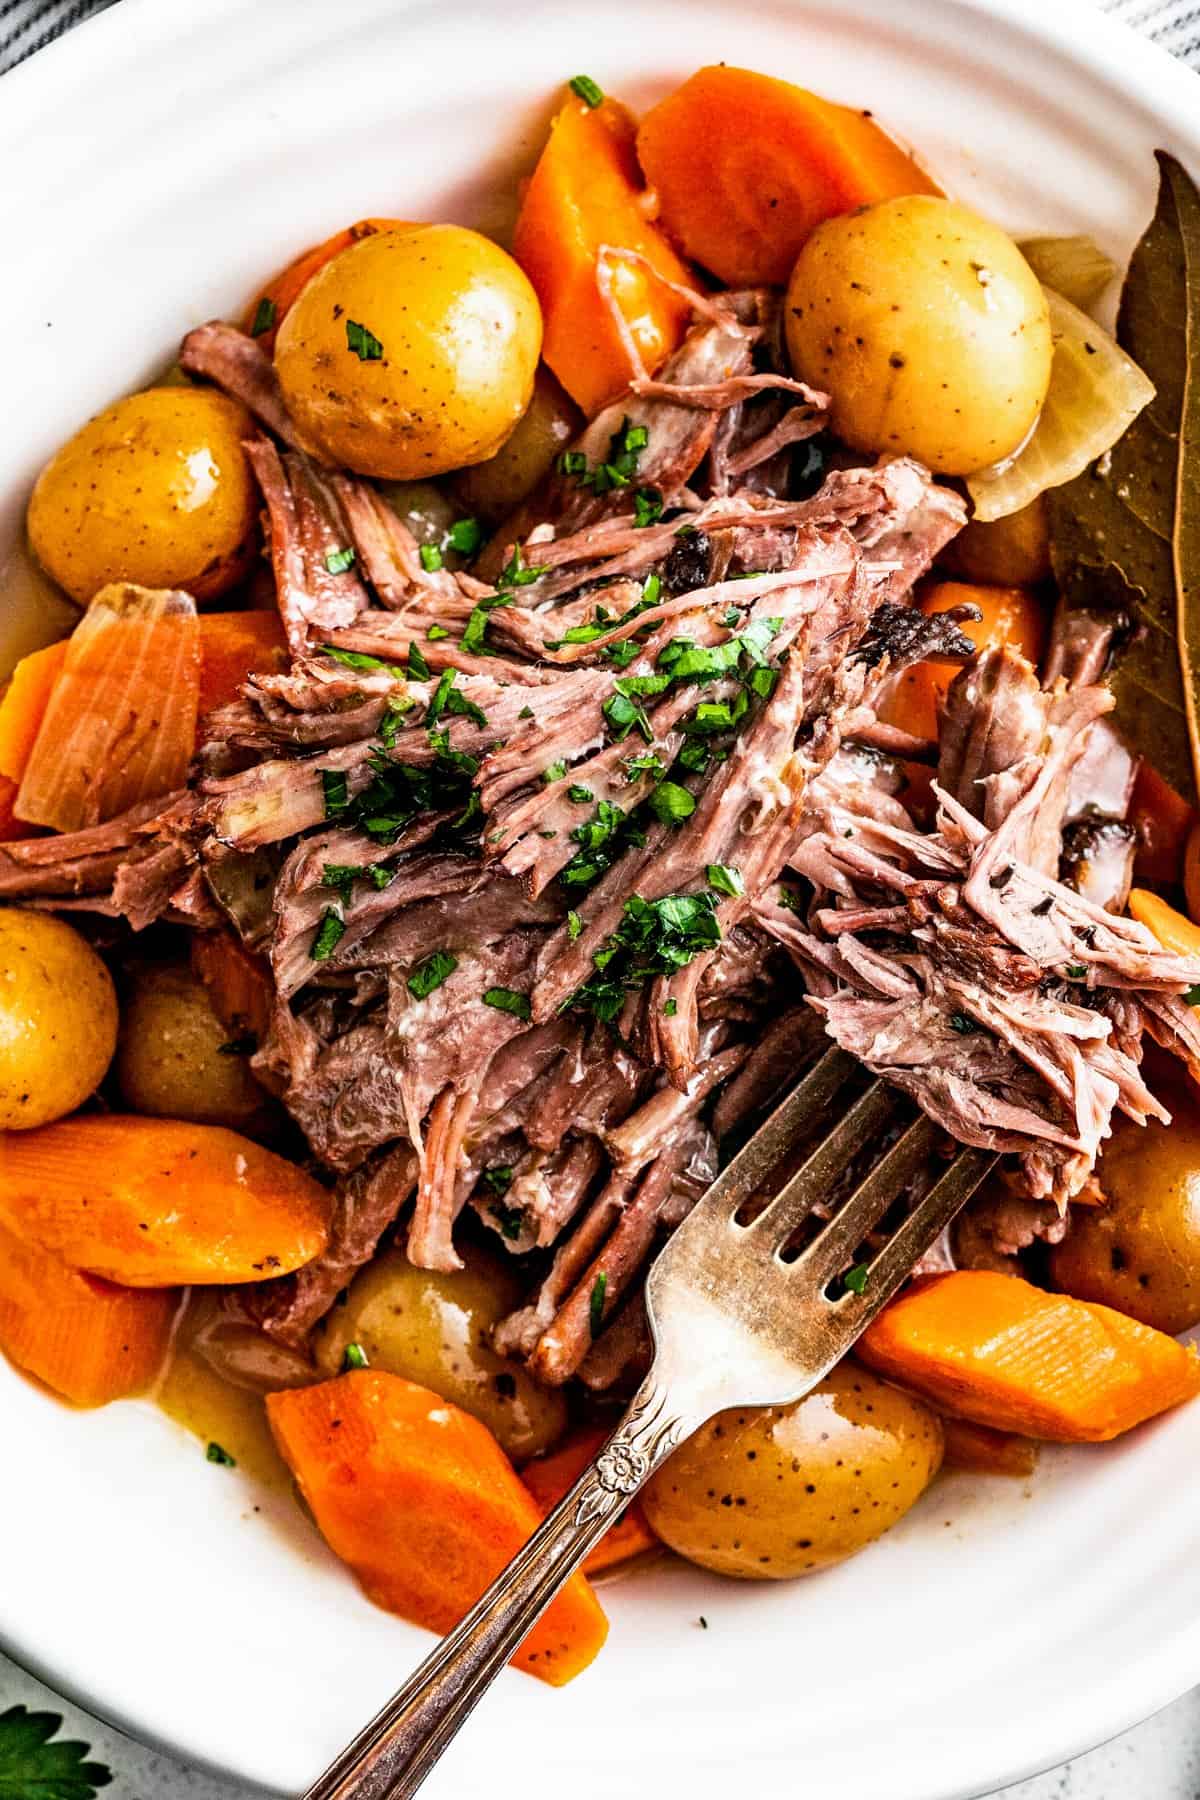 Shredded rump roast served on a plate with potatoes and carrots, and a fork.